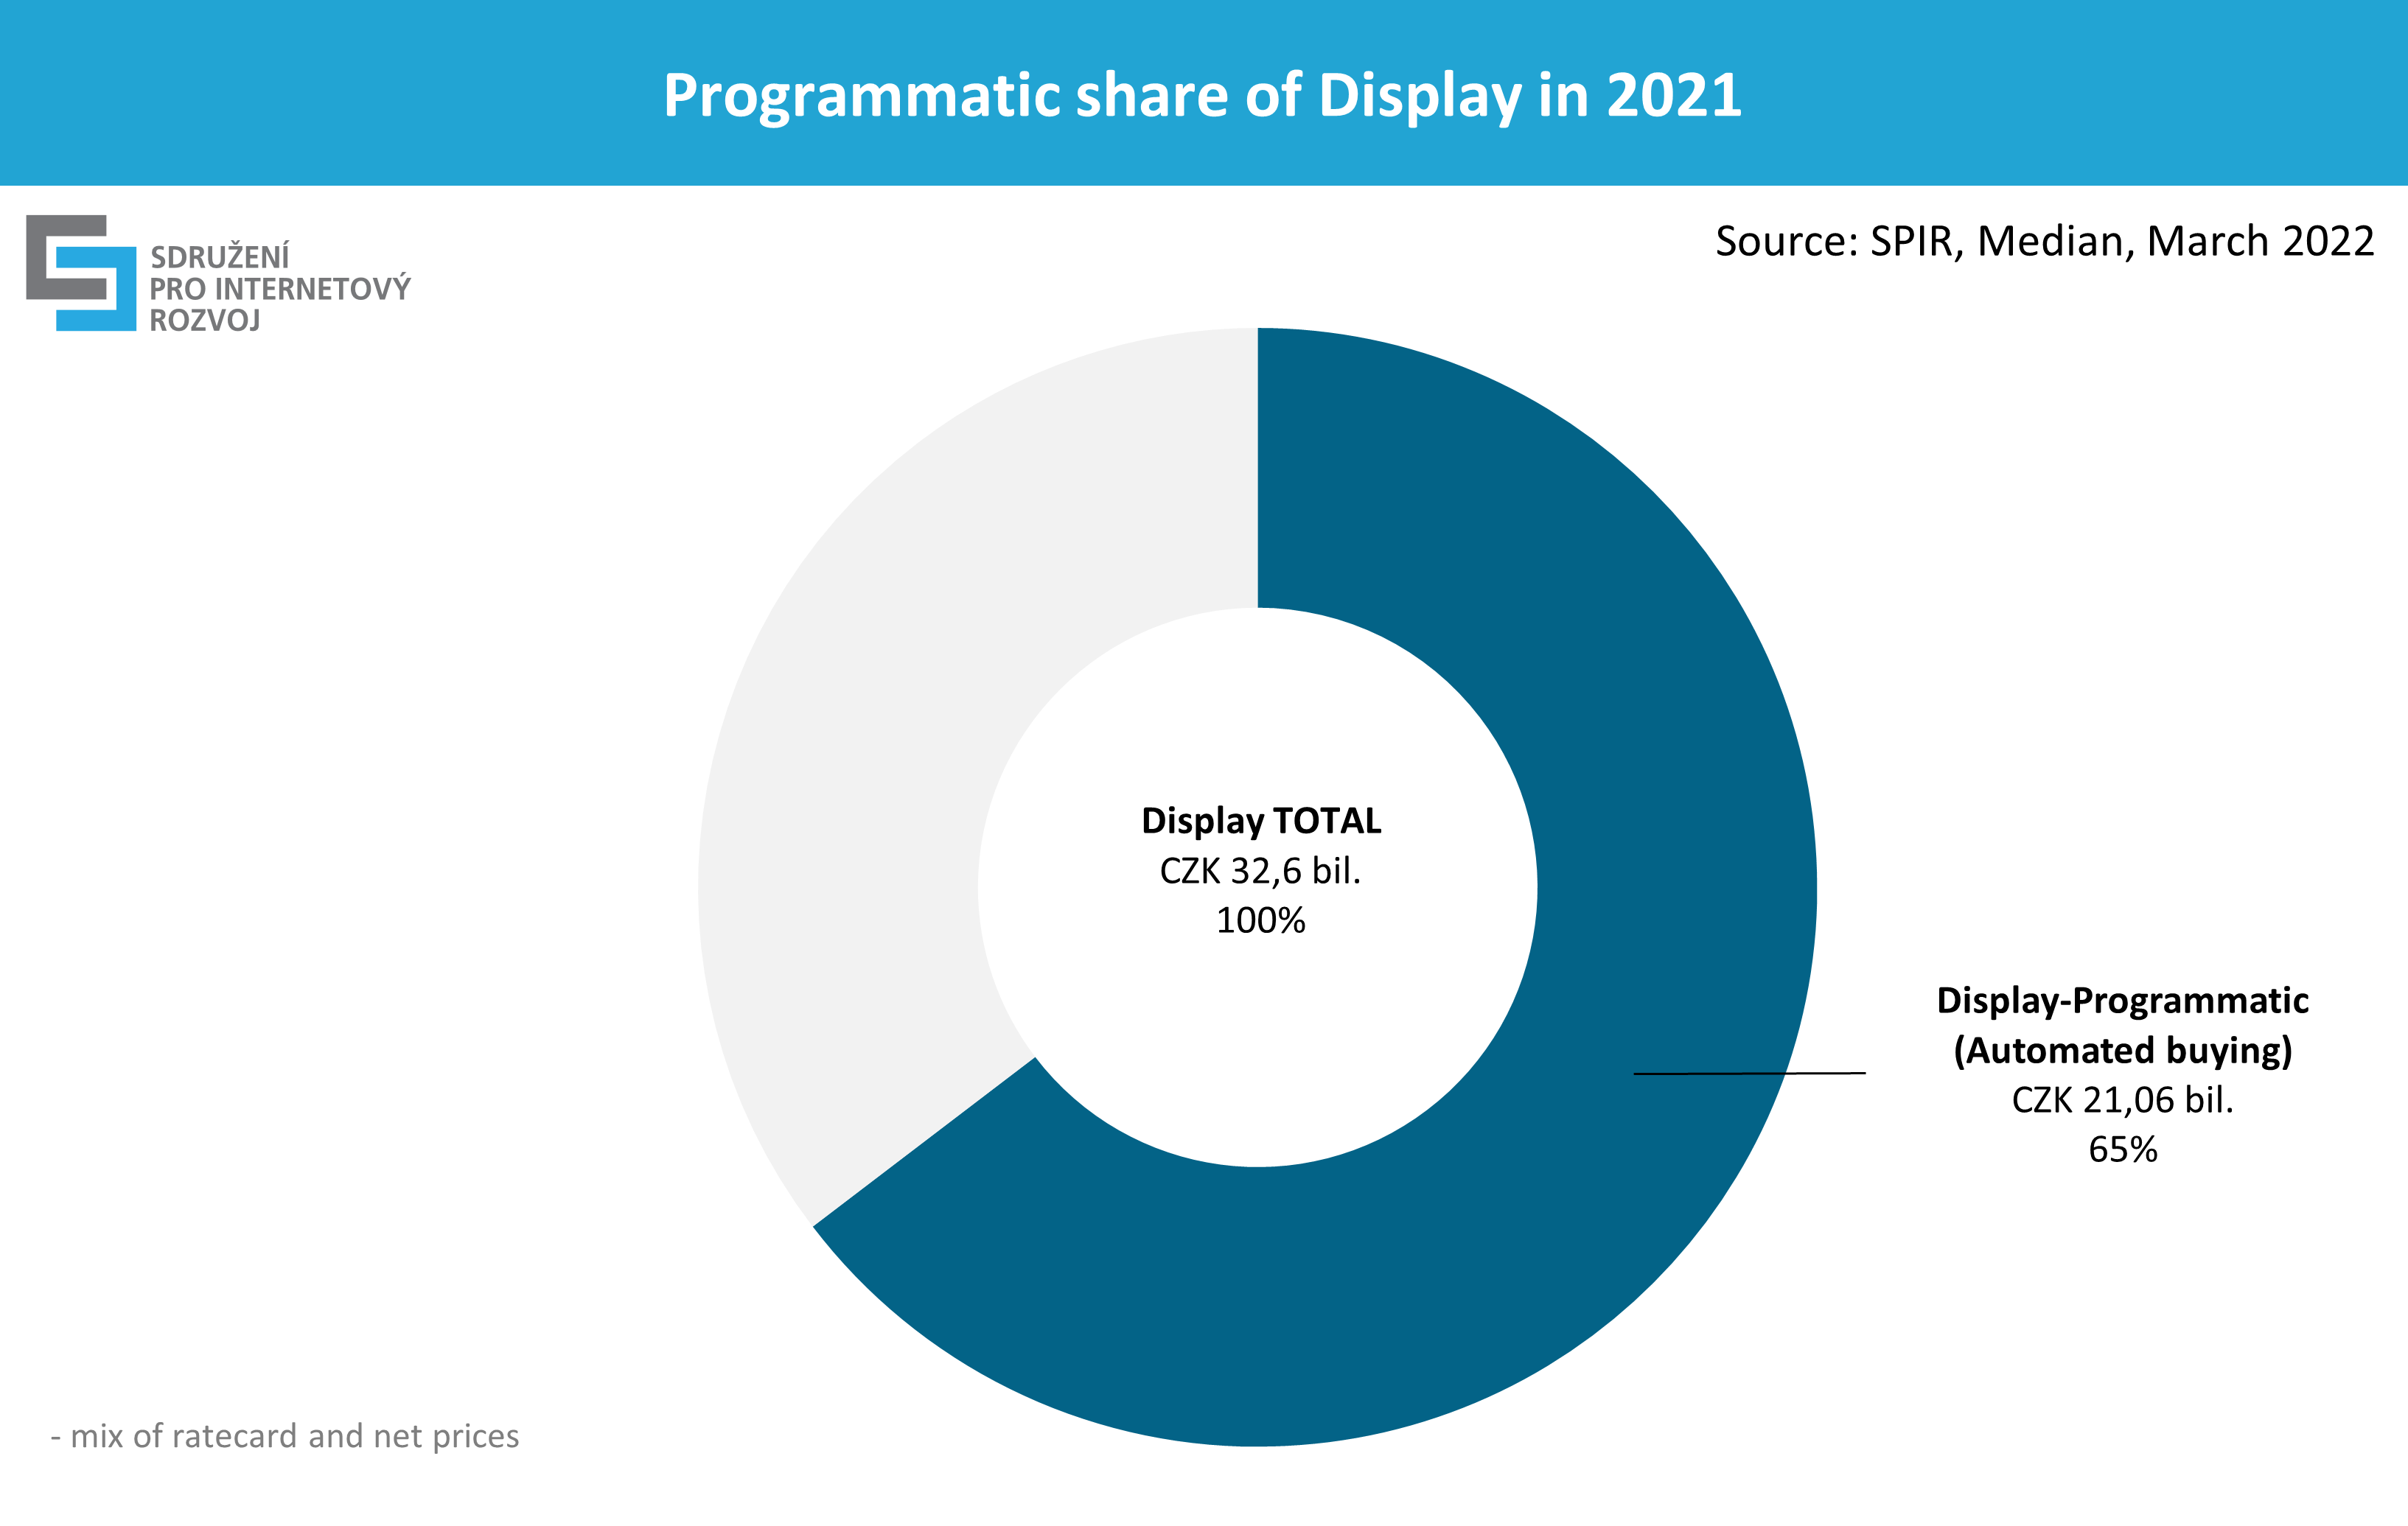 Programmatic share of Display in 2021